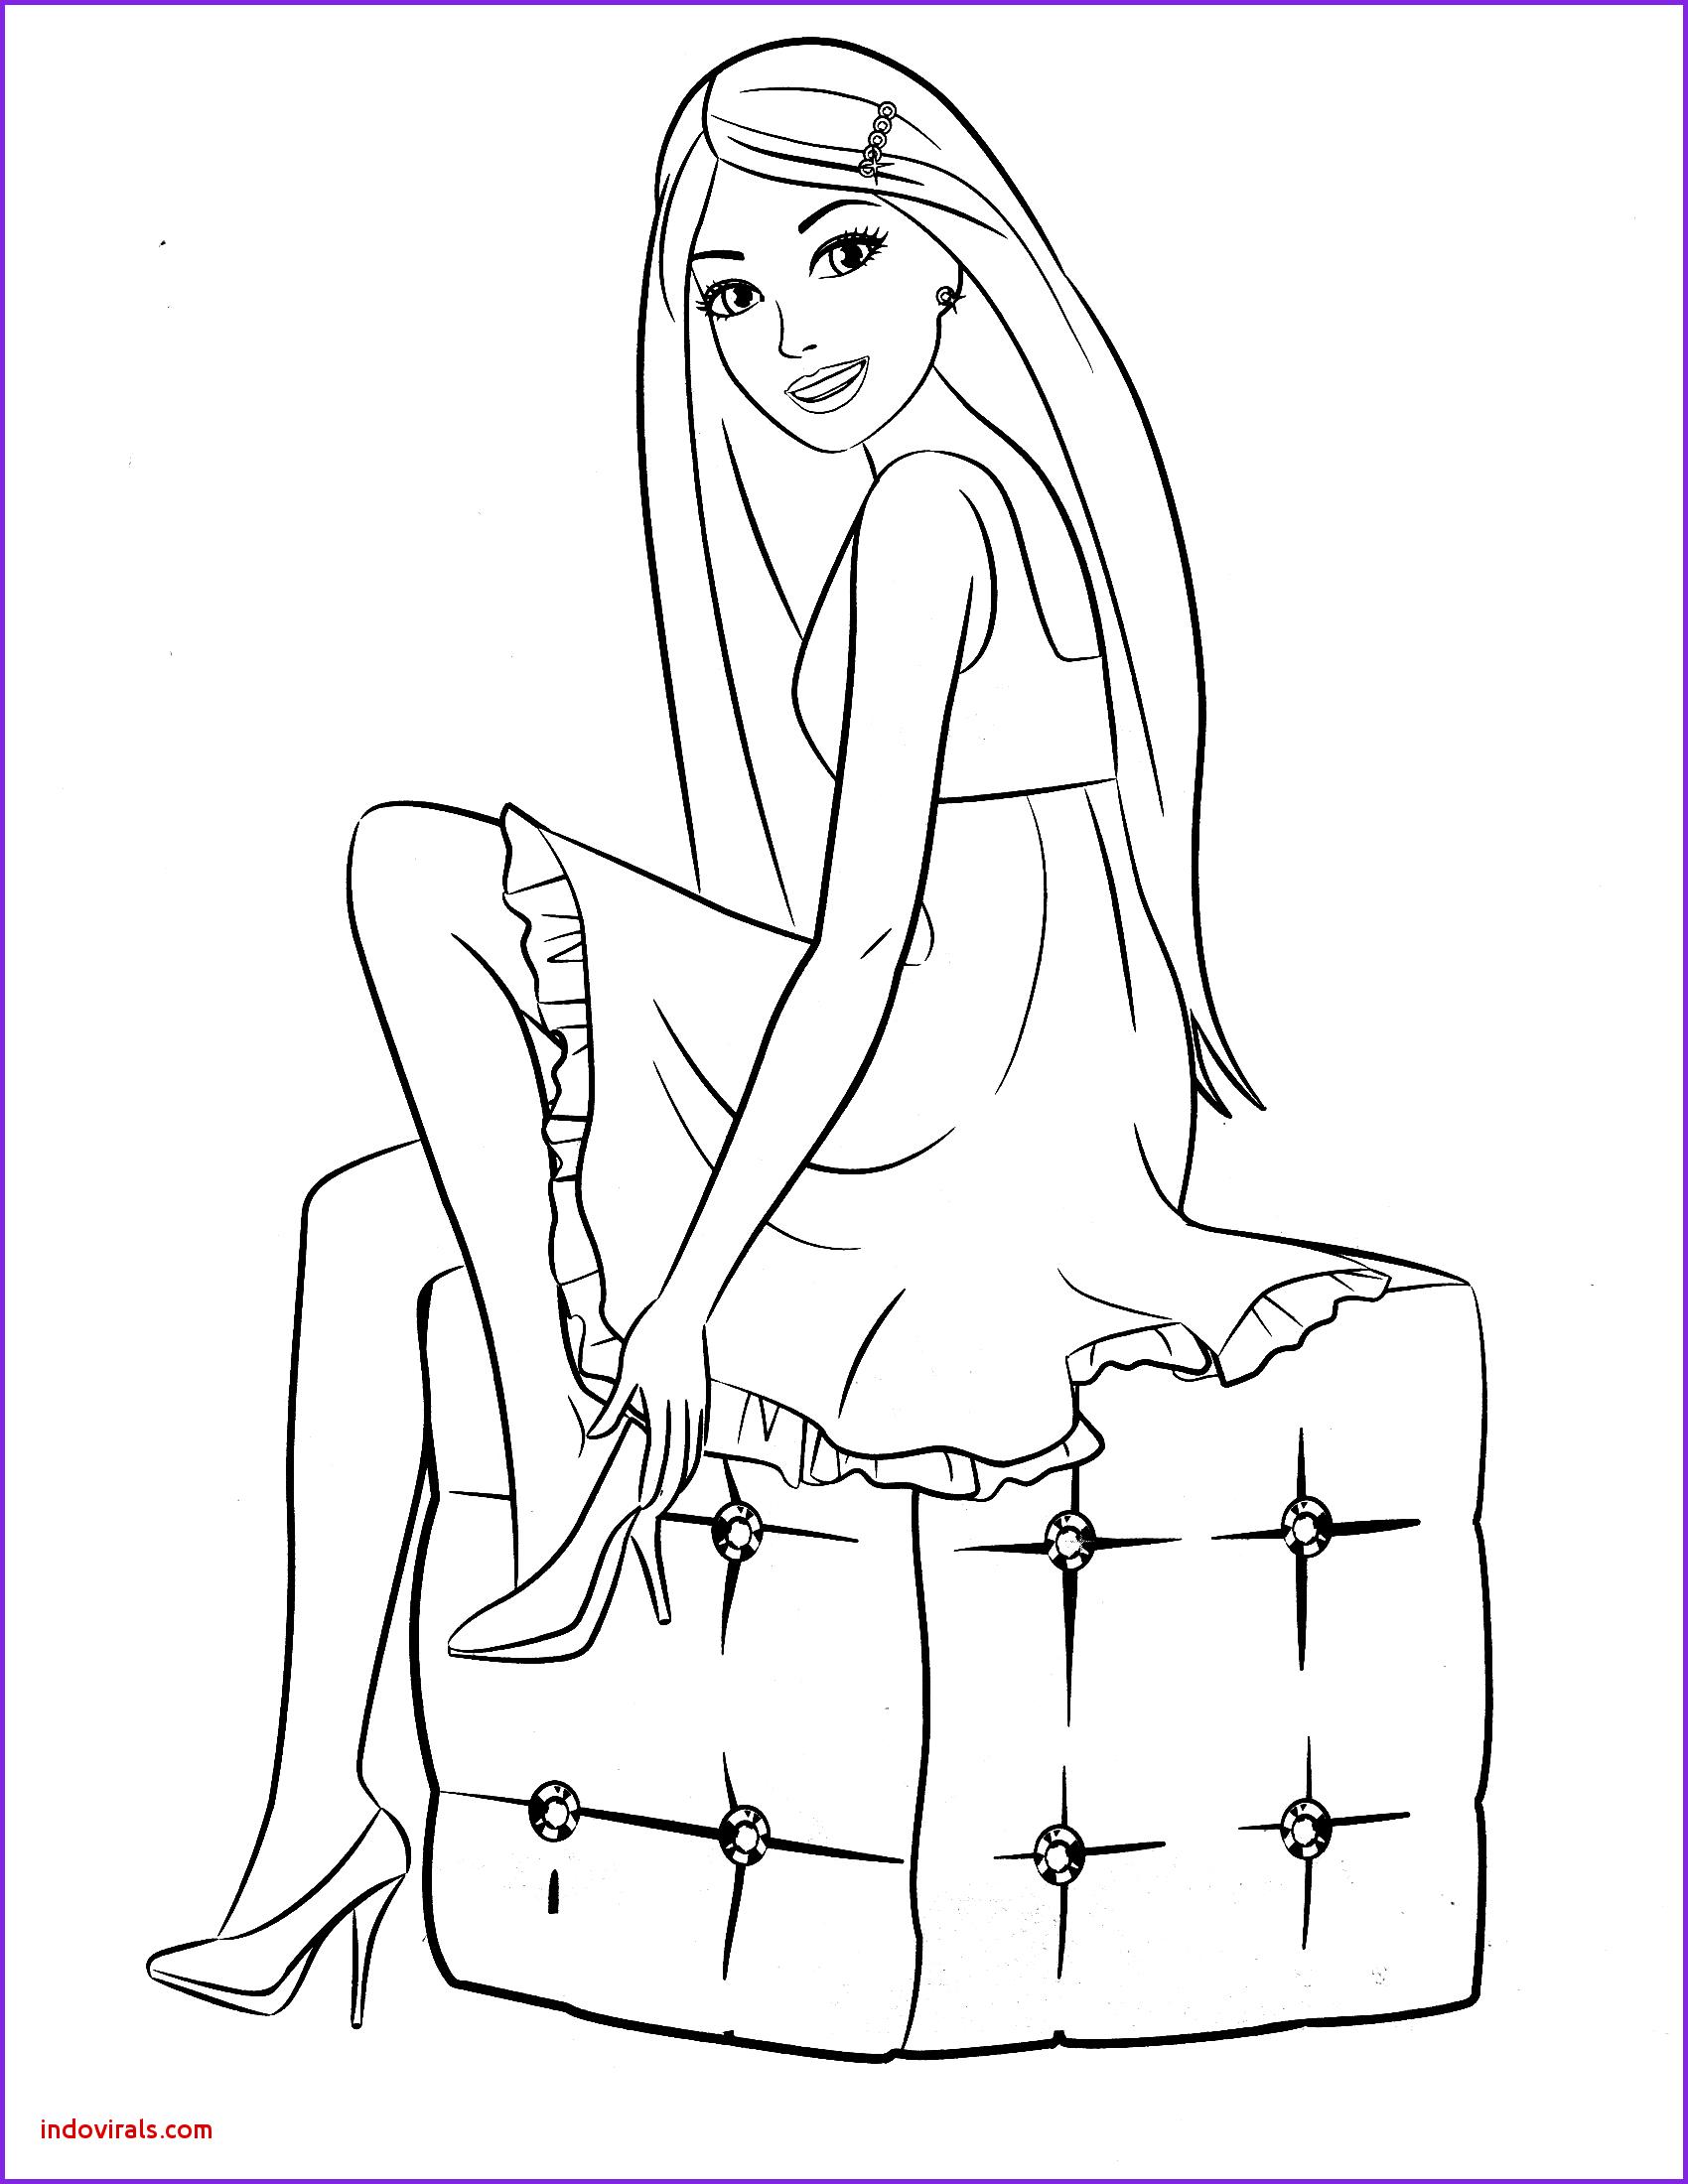 Coloring ~ Barbie And Friends Coloring Pages Colouring Book ...